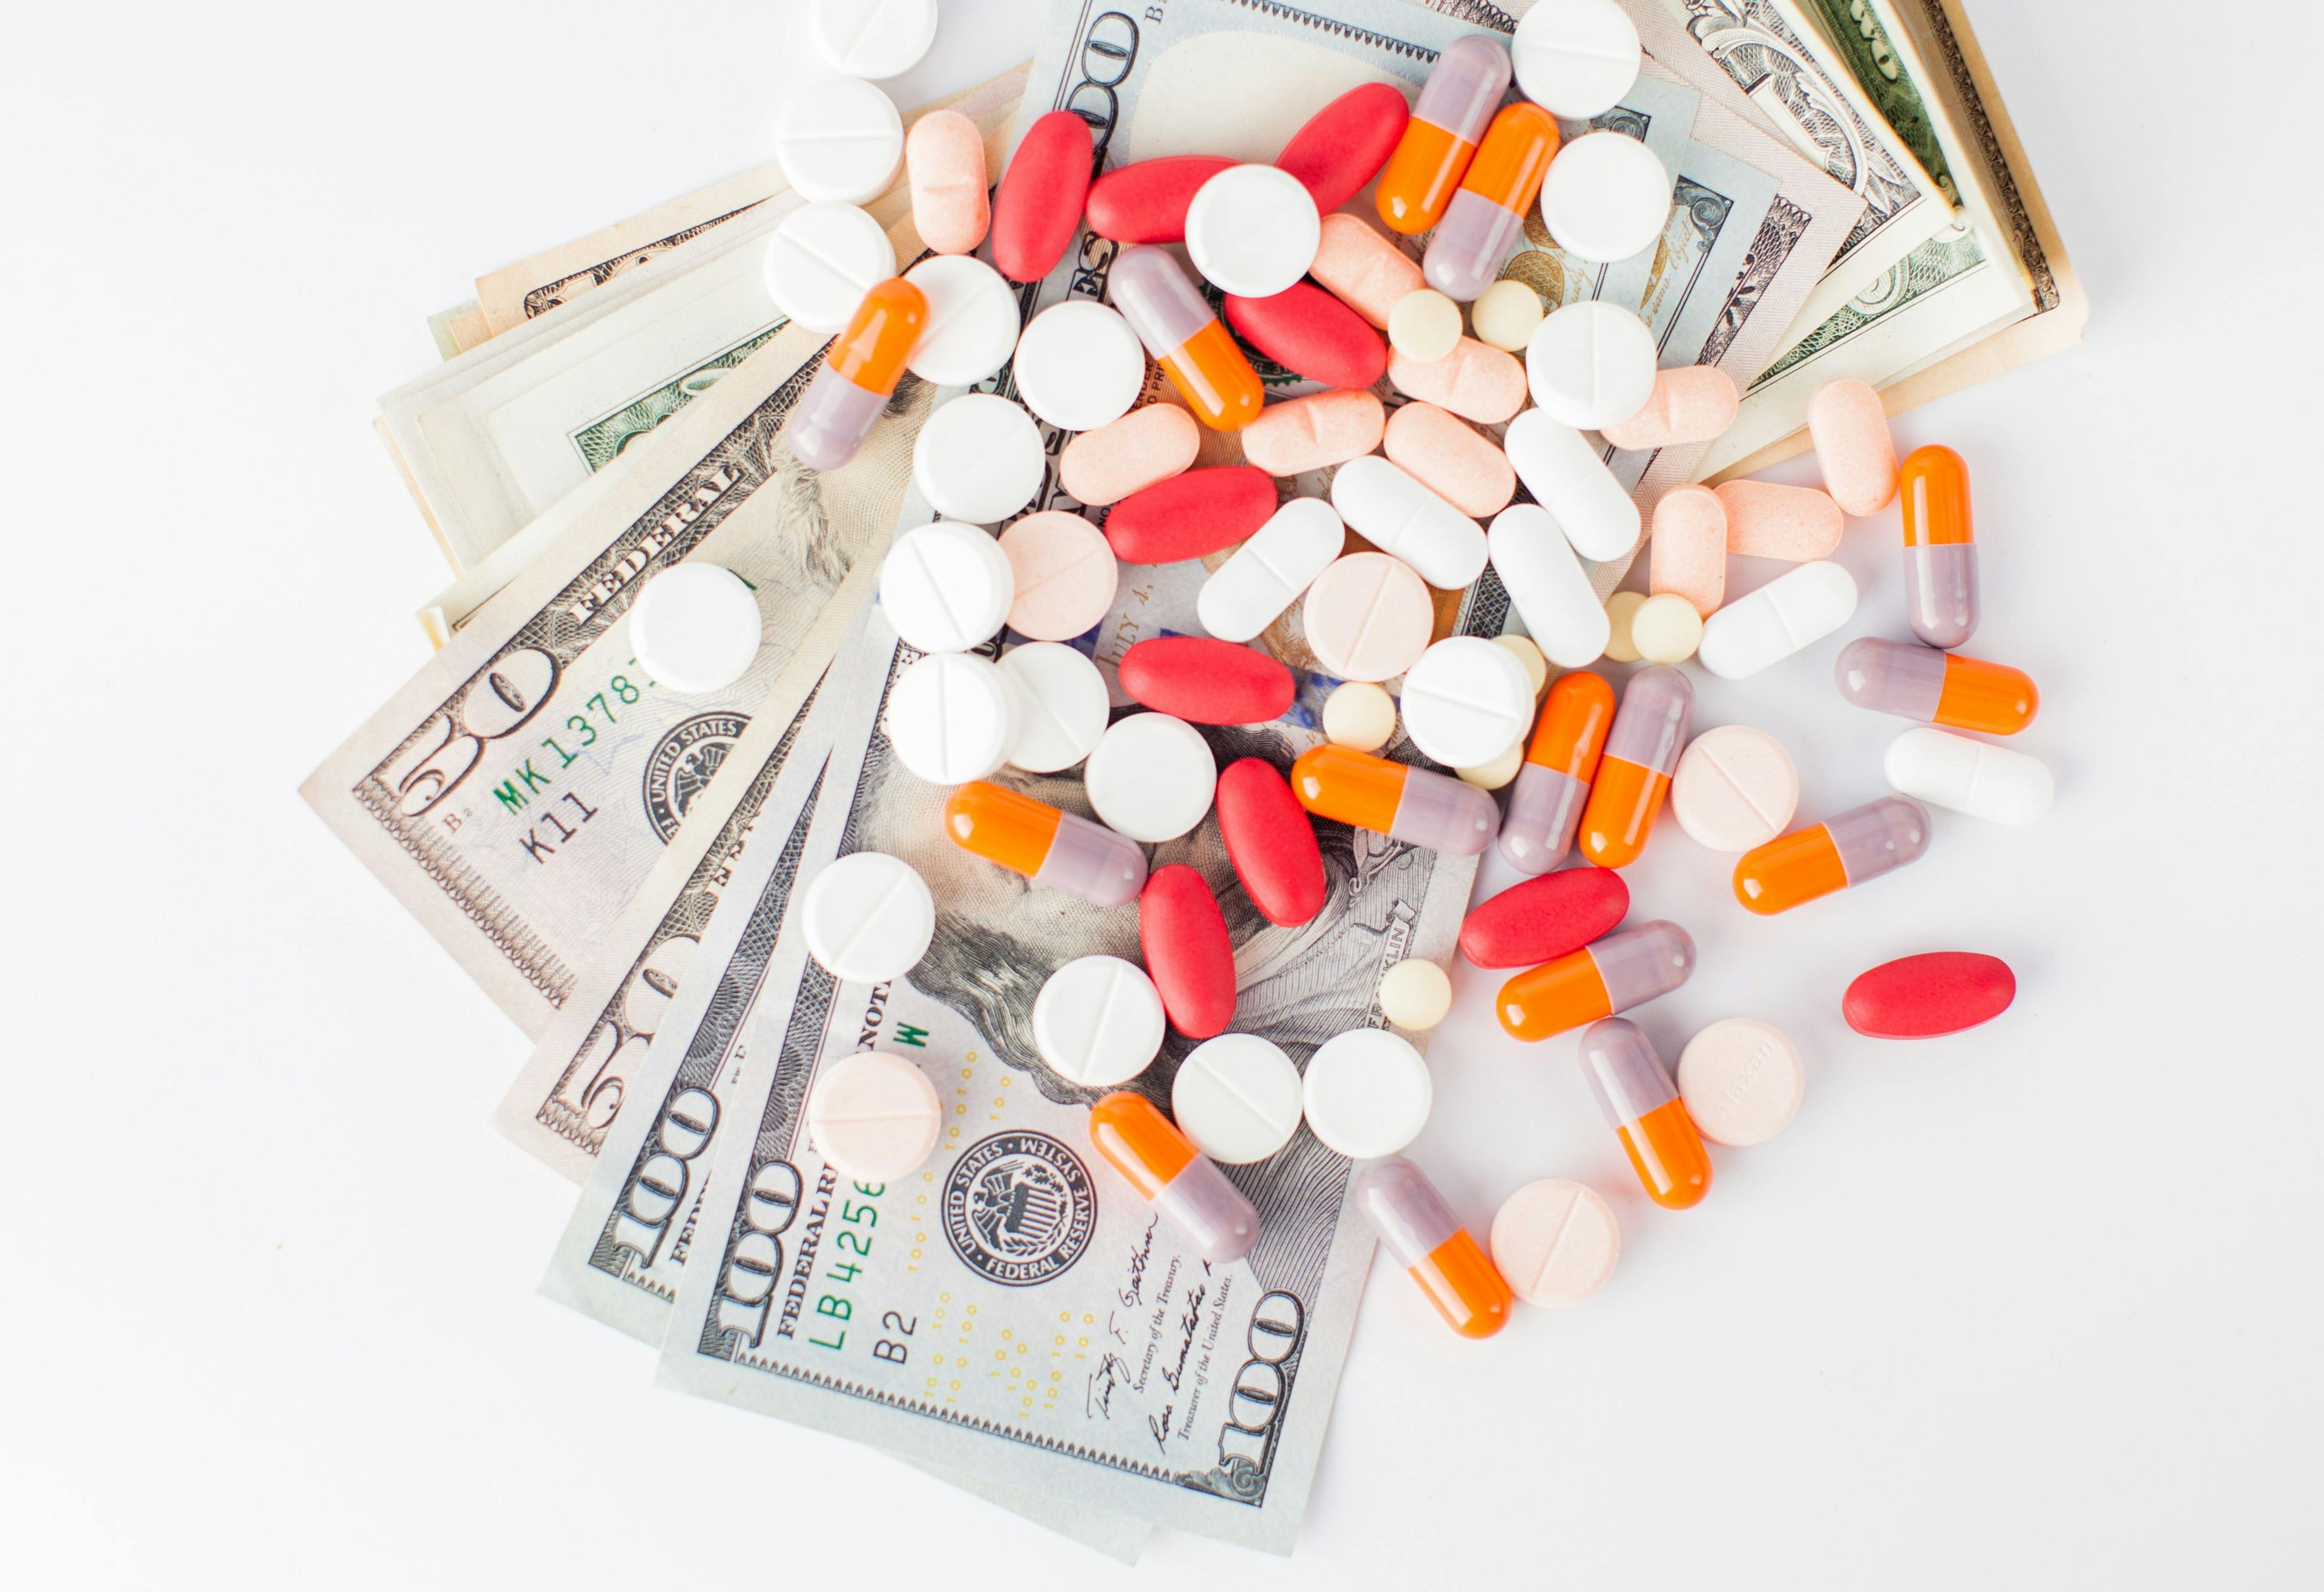 US Drug Prices Distorted to Favor Pharmacy Benefit Managers